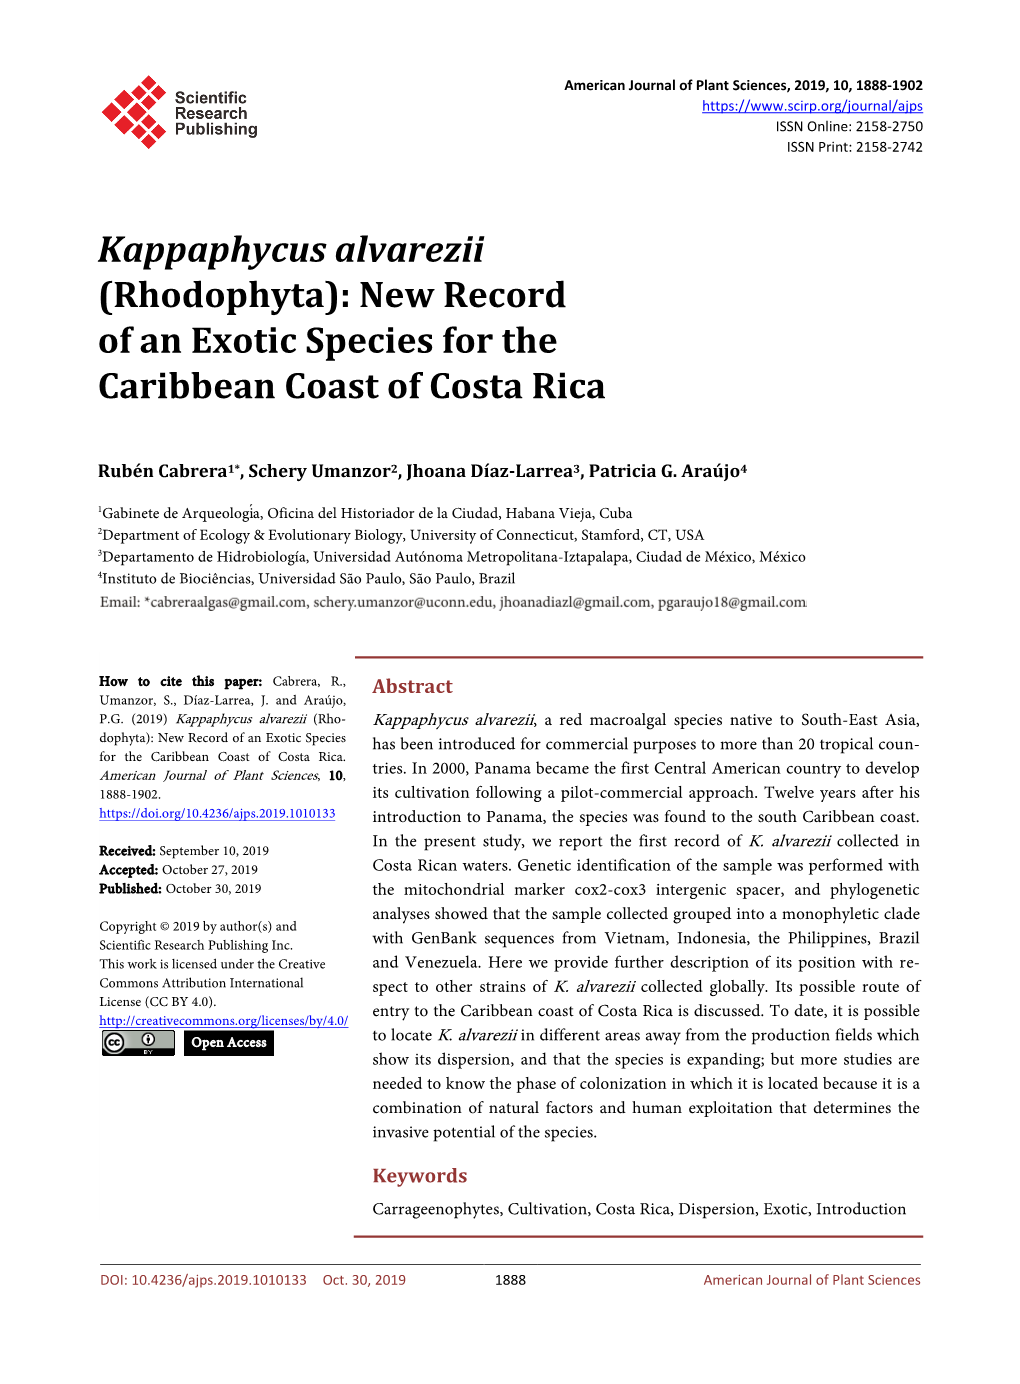 Kappaphycus Alvarezii (Rhodophyta): New Record of an Exotic Species for the Caribbean Coast of Costa Rica